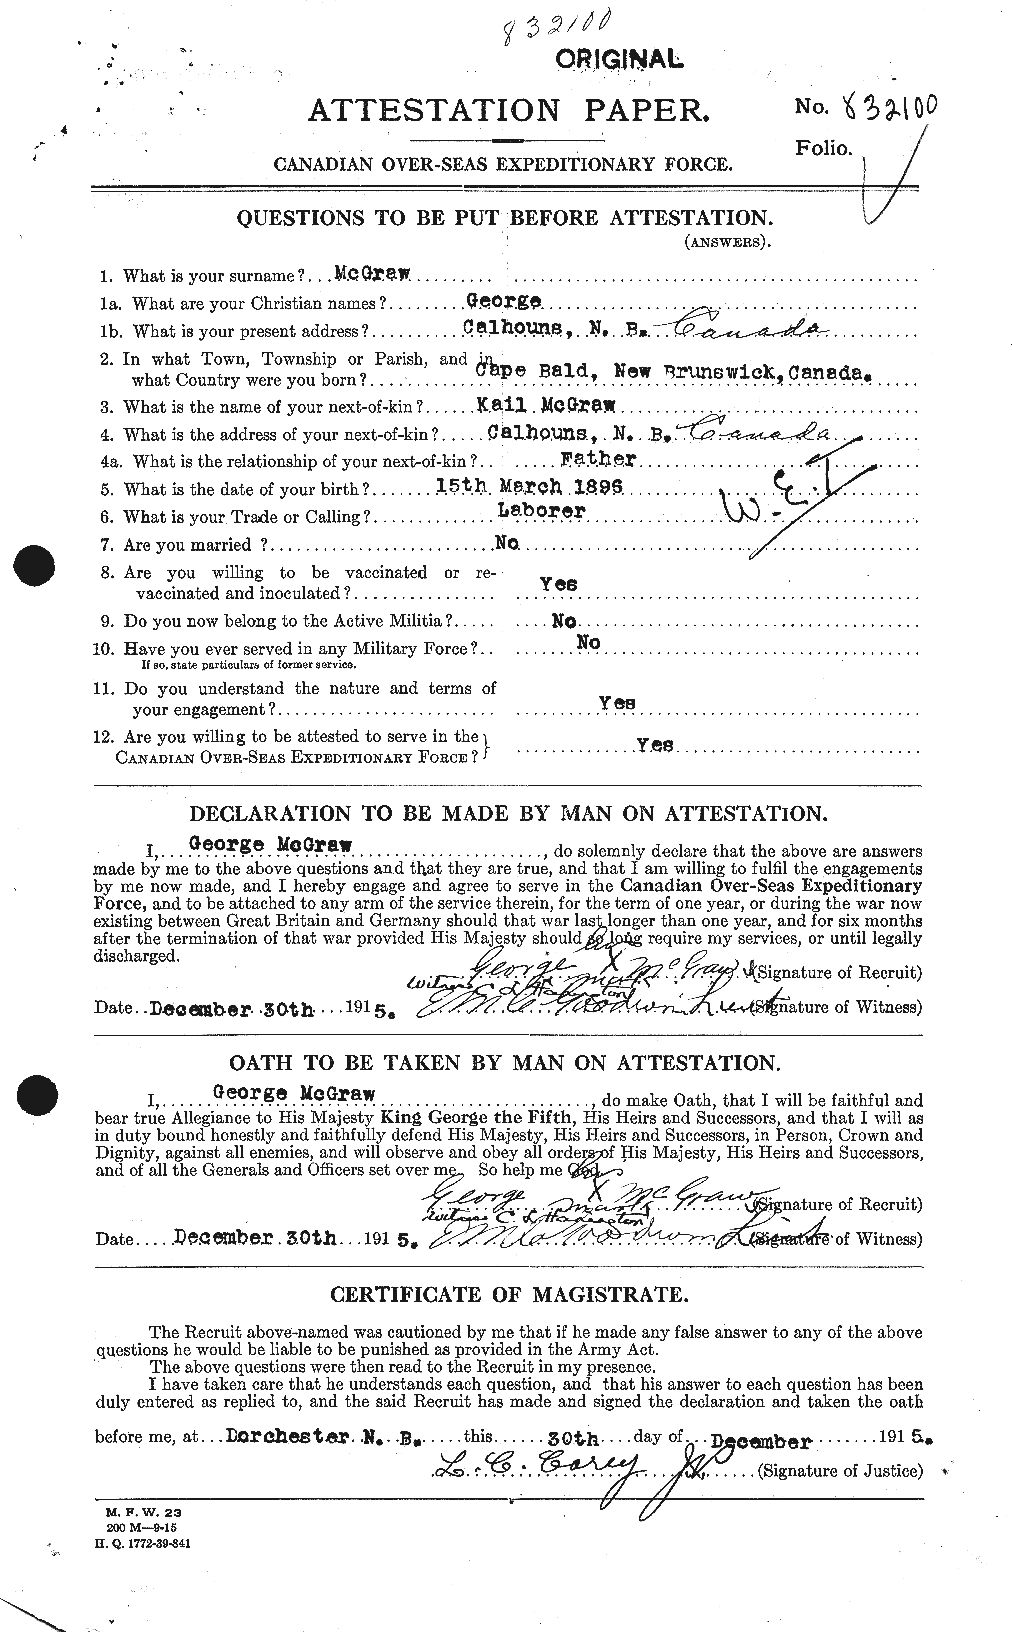 Personnel Records of the First World War - CEF 523731a